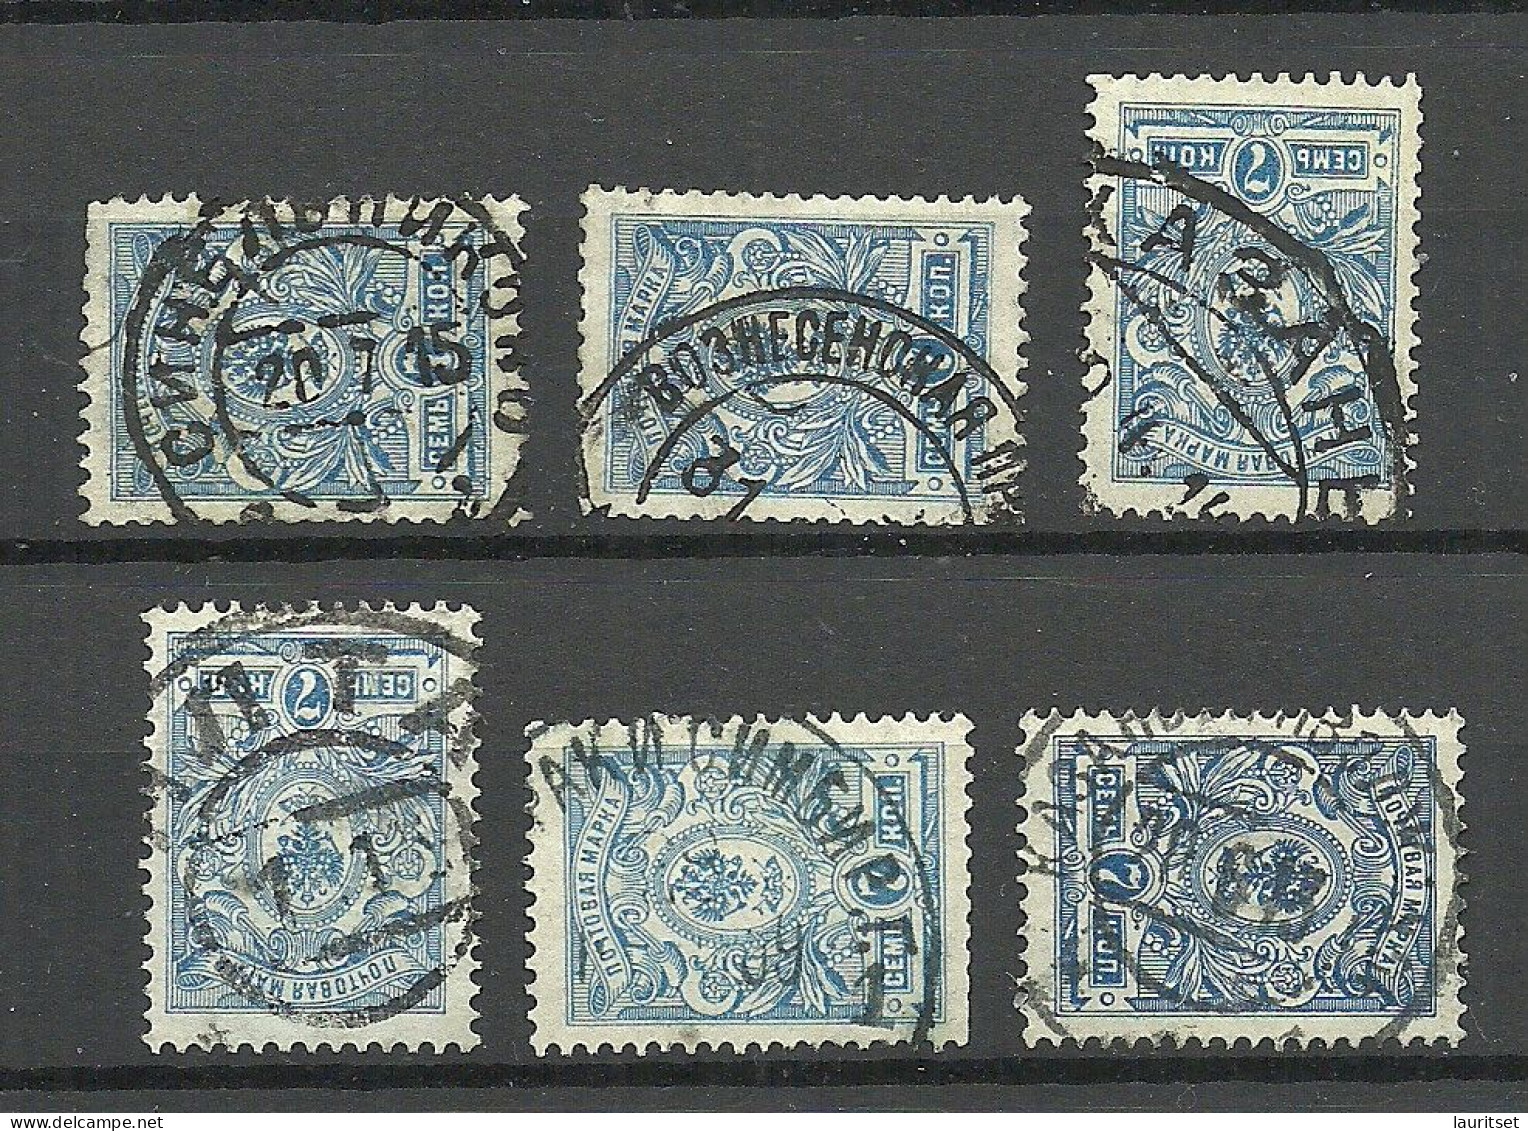 RUSSLAND RUSSIA 1908 Michel 68 I A, 6 Stamps, Nice Cancels - Gebraucht